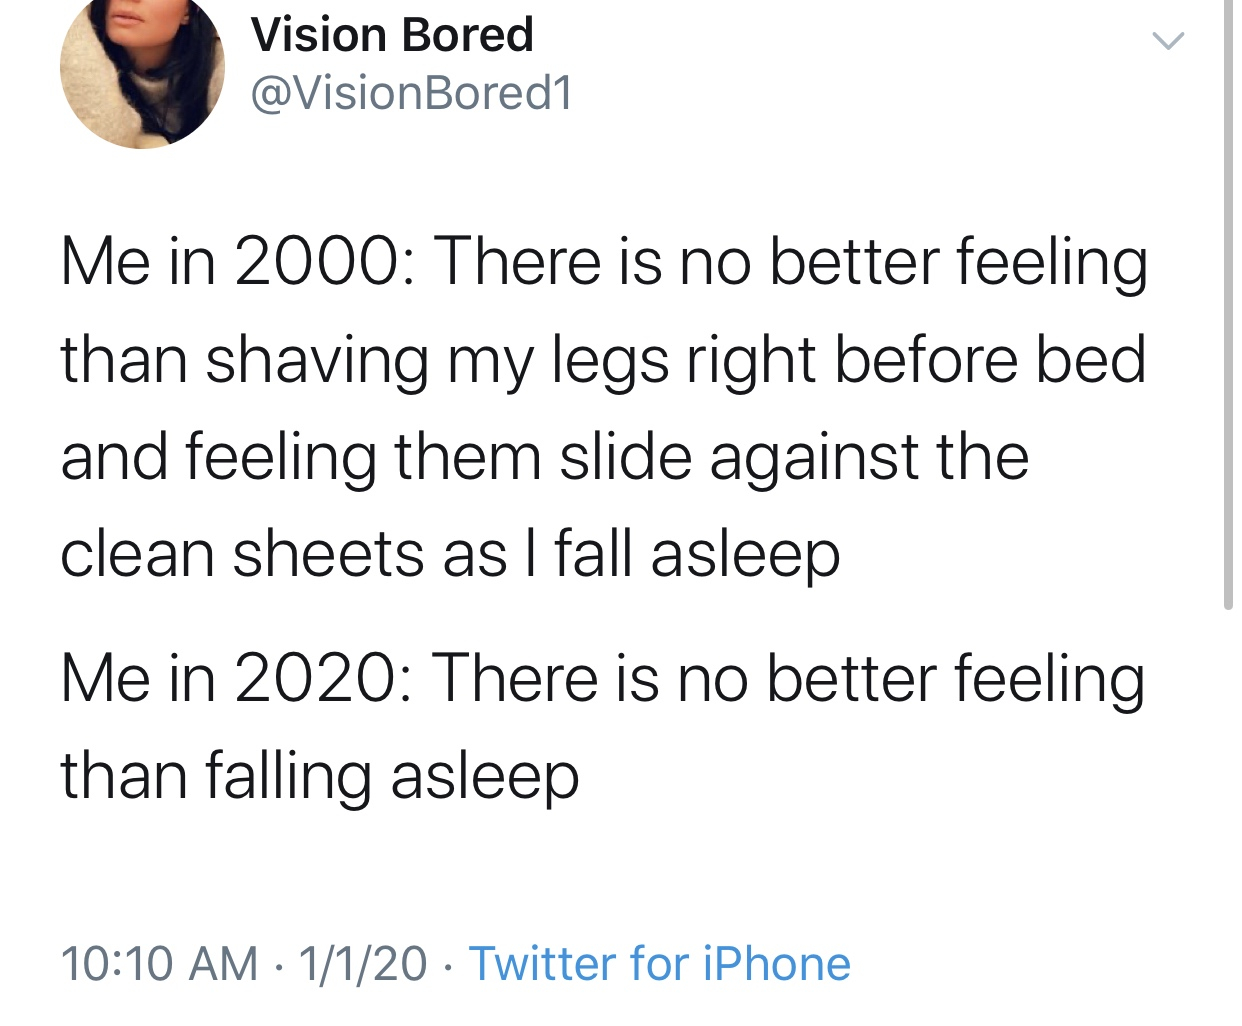 2020 memes - trans peter parker headcanon - Vision Bored Me in 2000 There is no better feeling than shaving my legs right before bed and feeling them slide against the clean sheets as I fall asleep Me in 2020 There is no better feeling than falling asleep